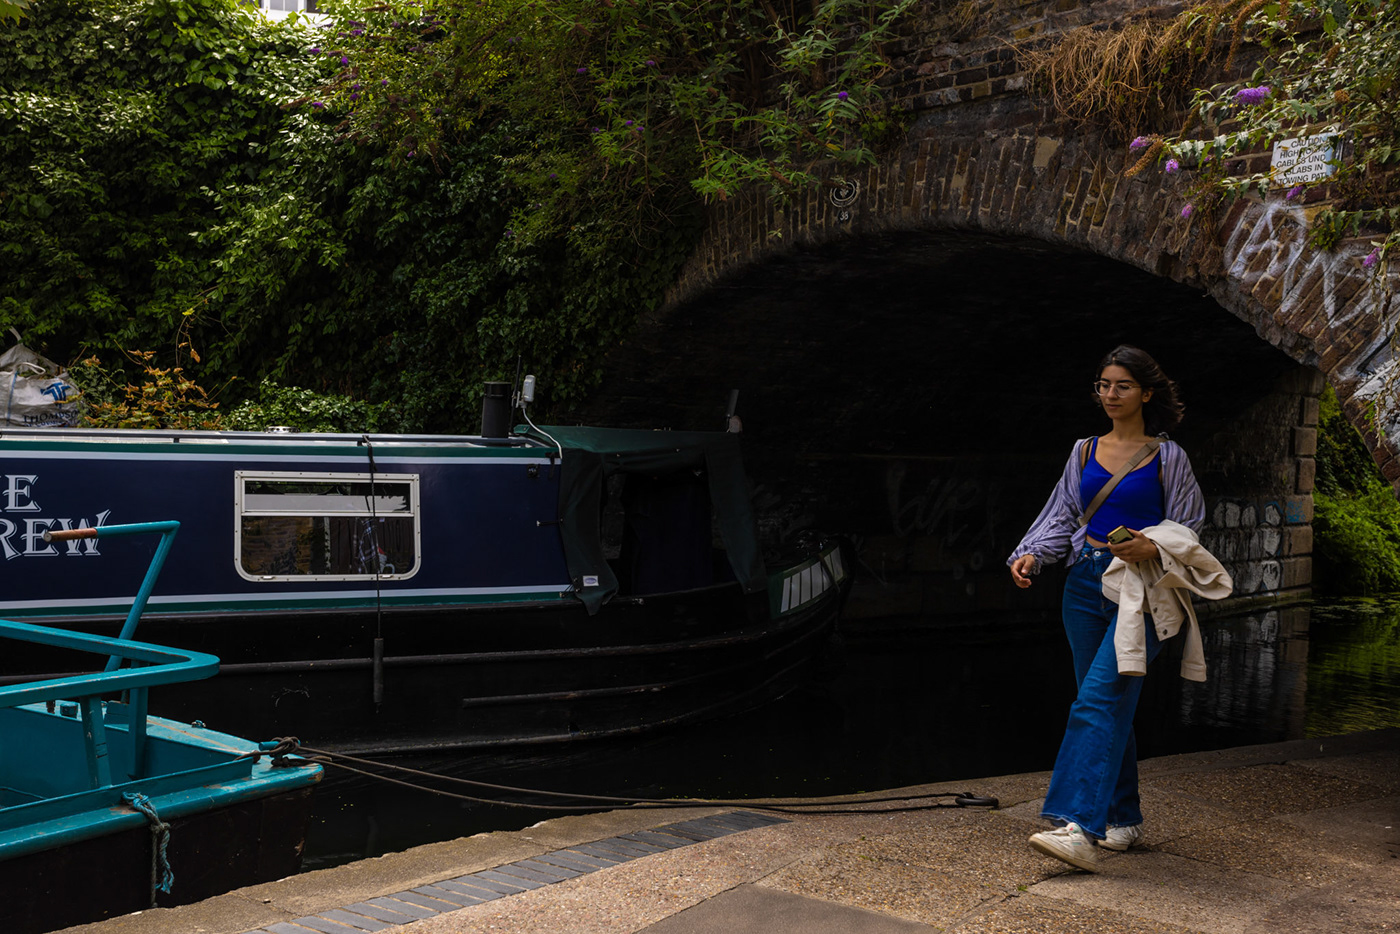 London Shane Aurousseau photographer Canalside travel photography lifestyle photography cityscapes Waterways & Canals waterways of Britain cityscape photography